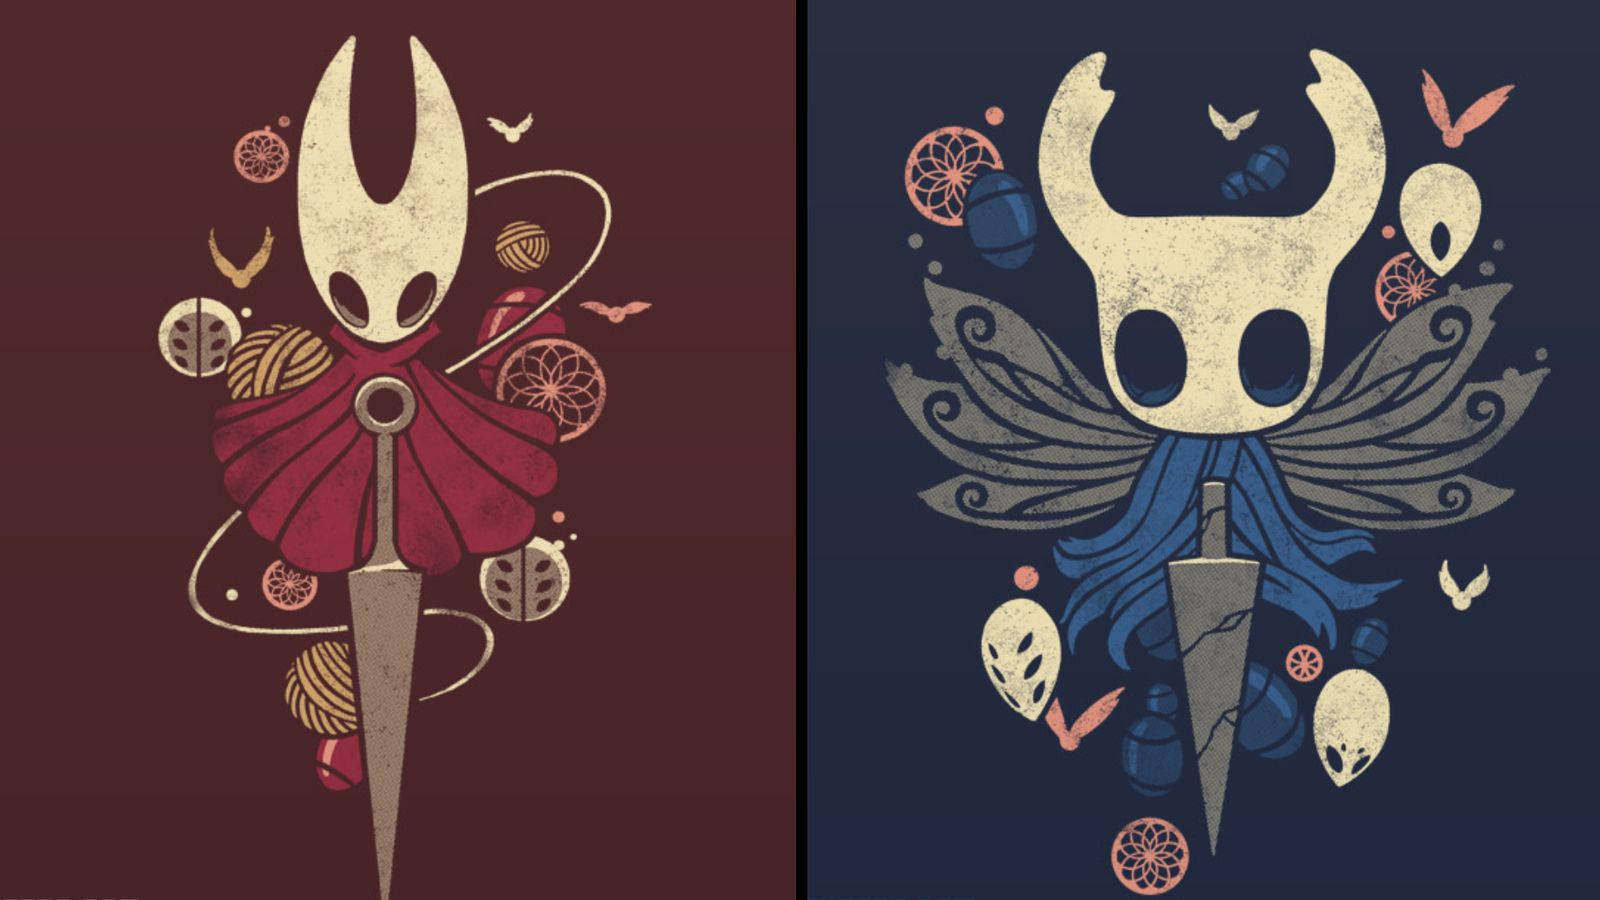 Hornet And Hollow Knight Artwork Background